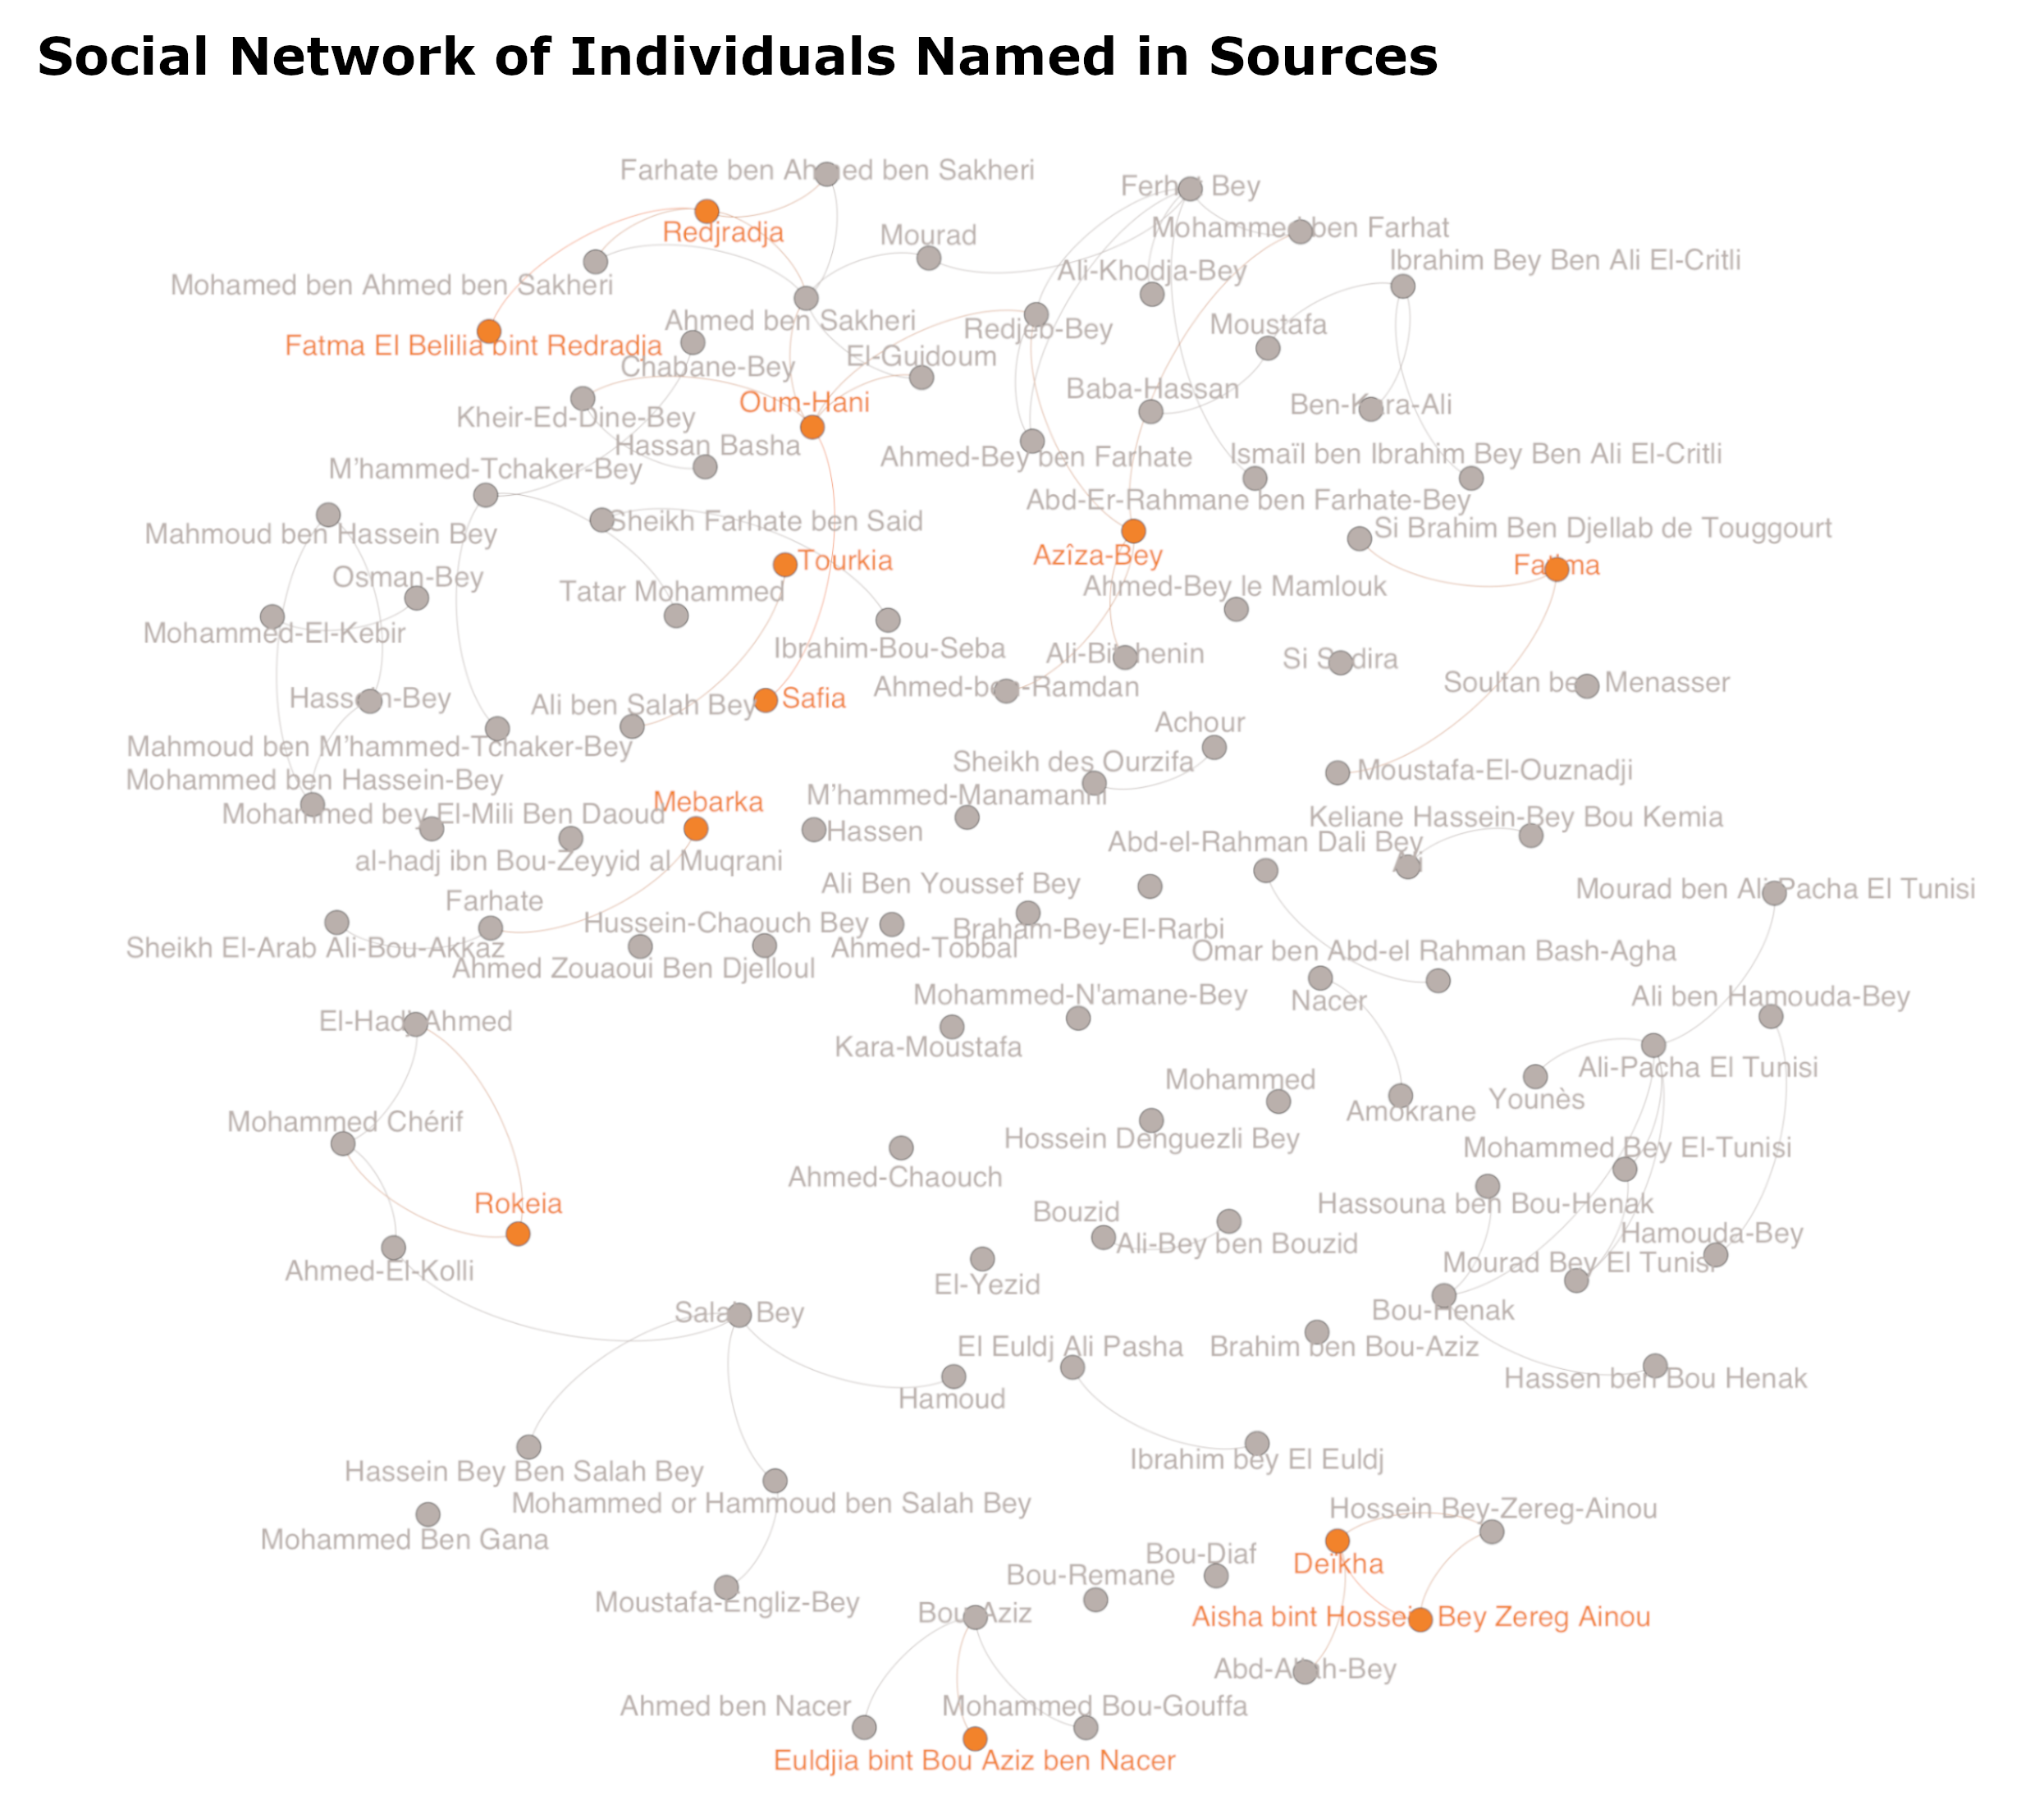 Network graph, showing Ottoman-Algerian Social Network with only named individuals.